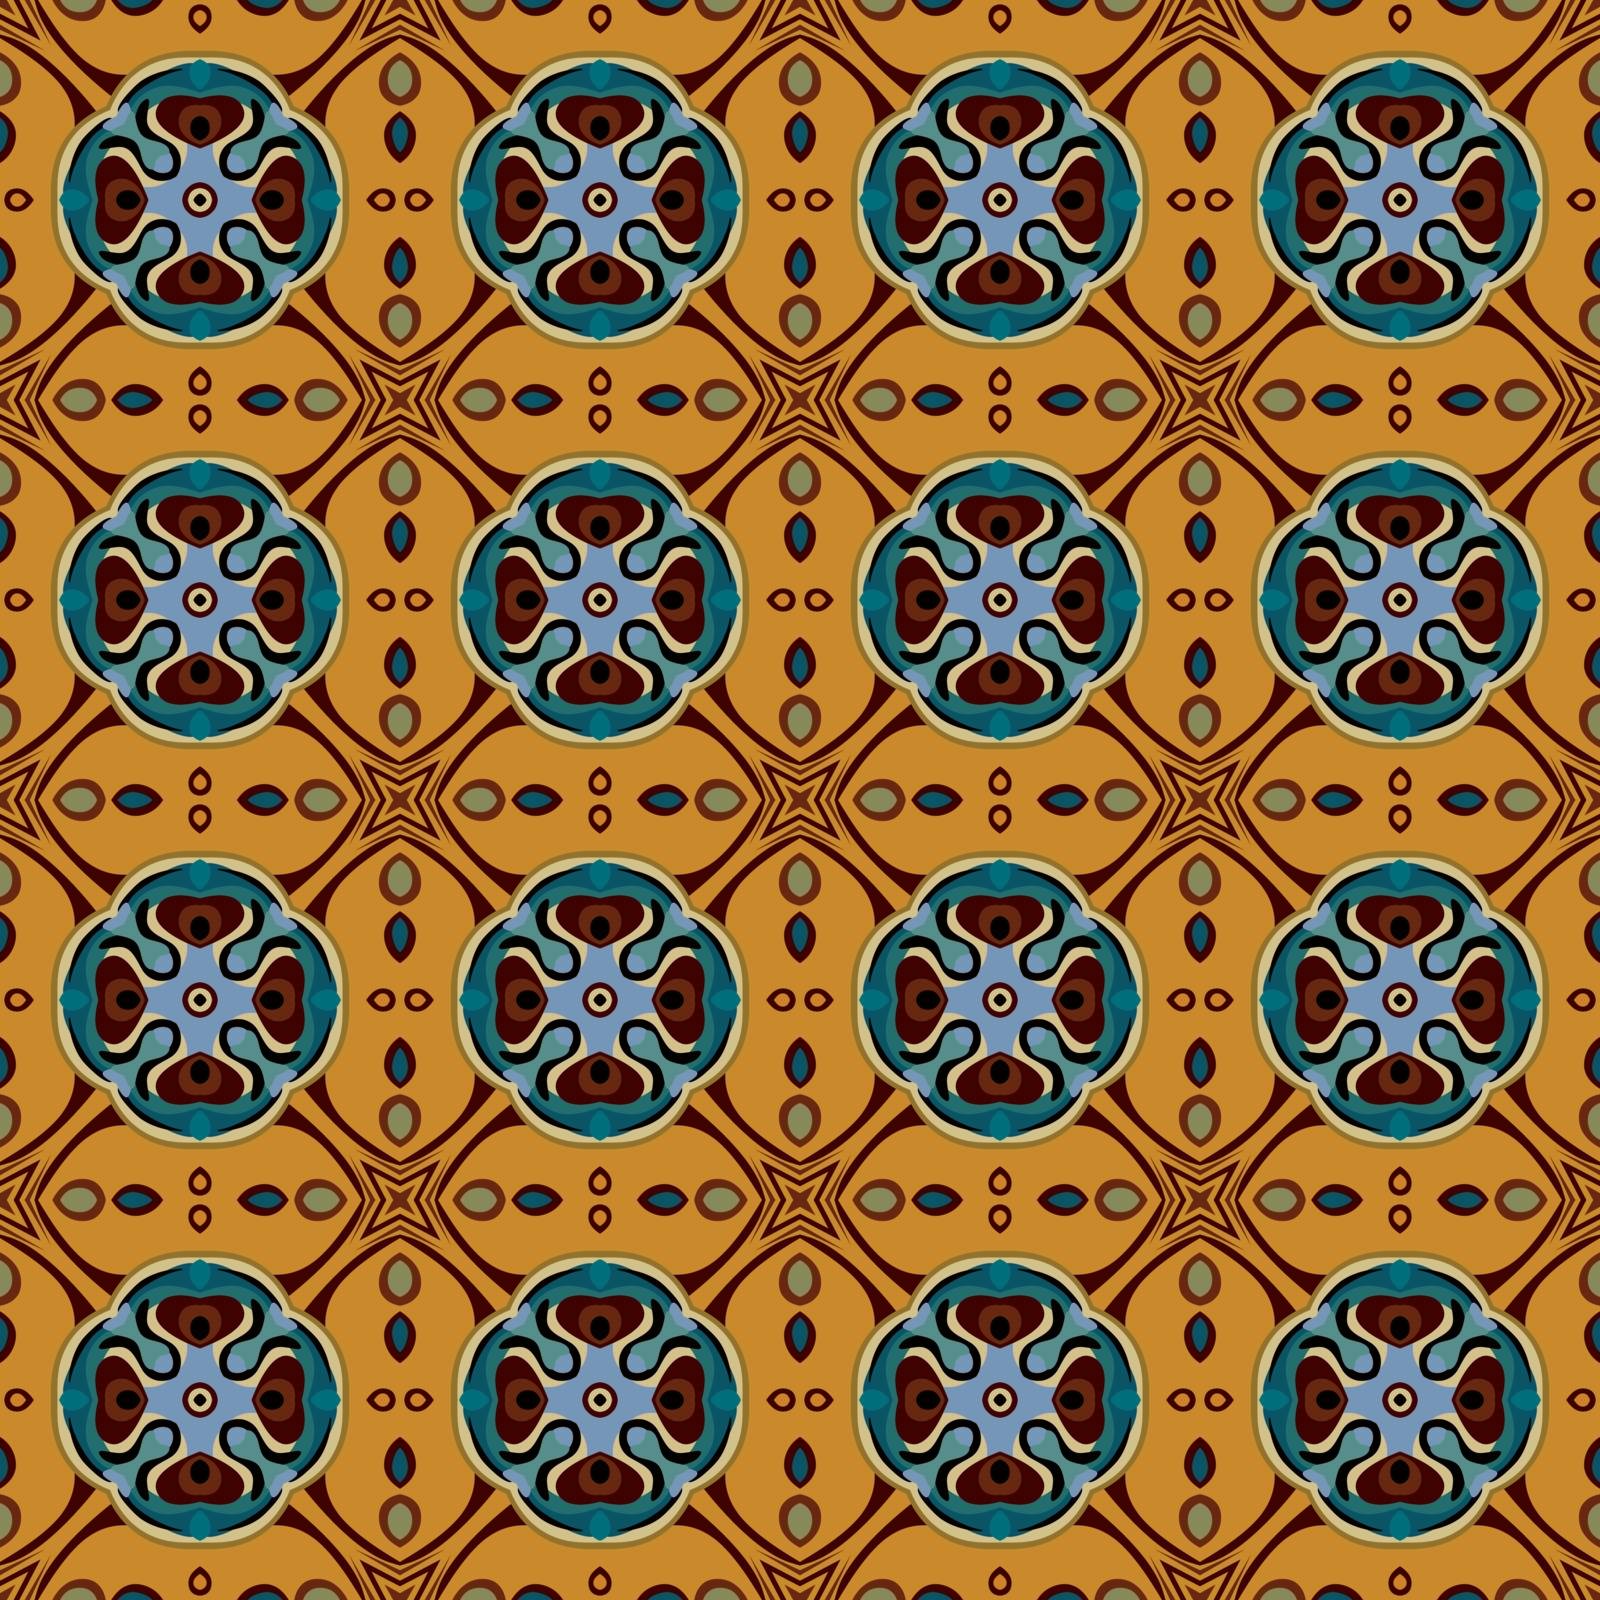 Seamless illustrated pattern made of abstract elements in yellow, orange, brown, blue and black